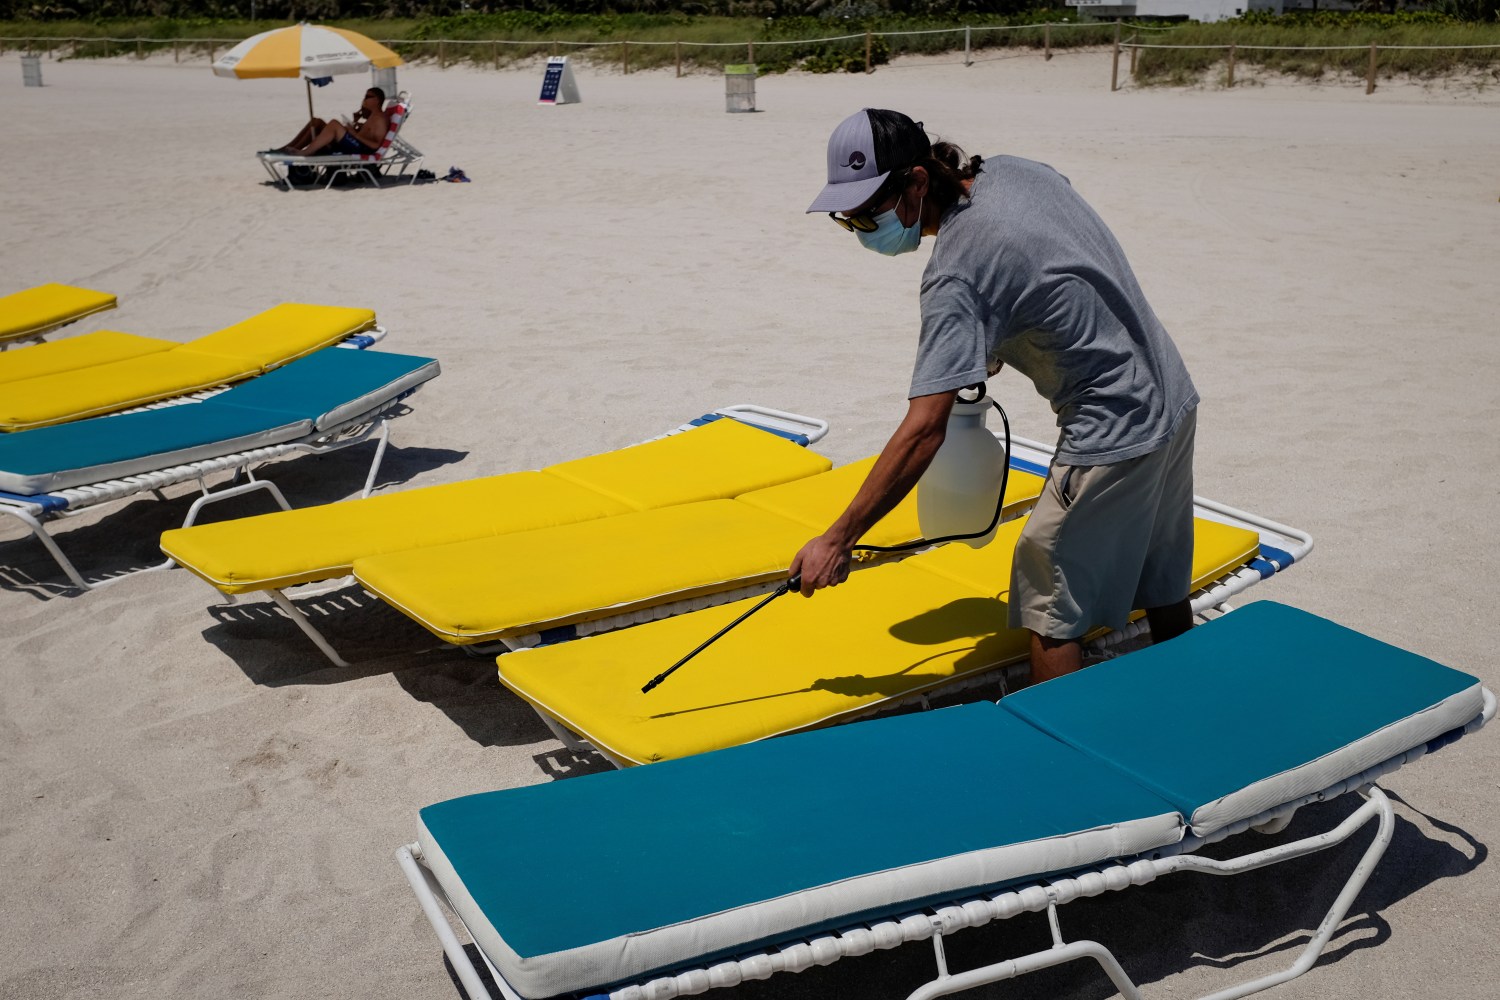 A worker sanitizes loungers as beaches are reopened with restrictions to limit the spread of the coronavirus disease (COVID-19), in Miami Beach, Florida, U.S., June 10, 2020. REUTERS/Marco Bello